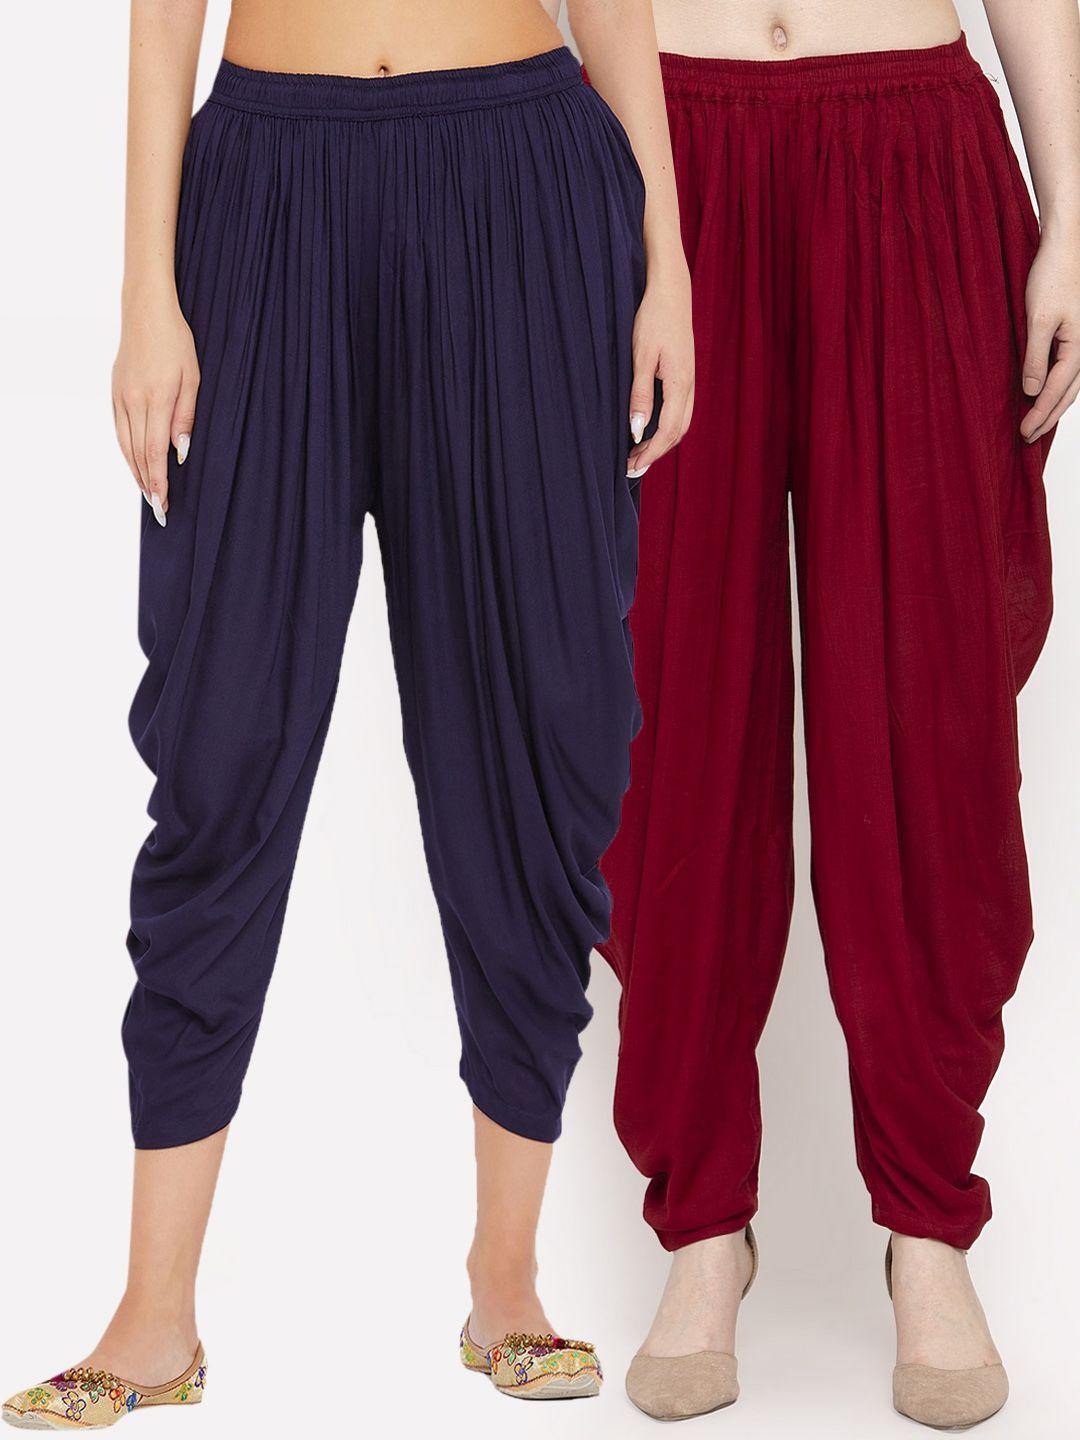 clora creation women pack of 2 navy blue & maroon solid dhoti pants